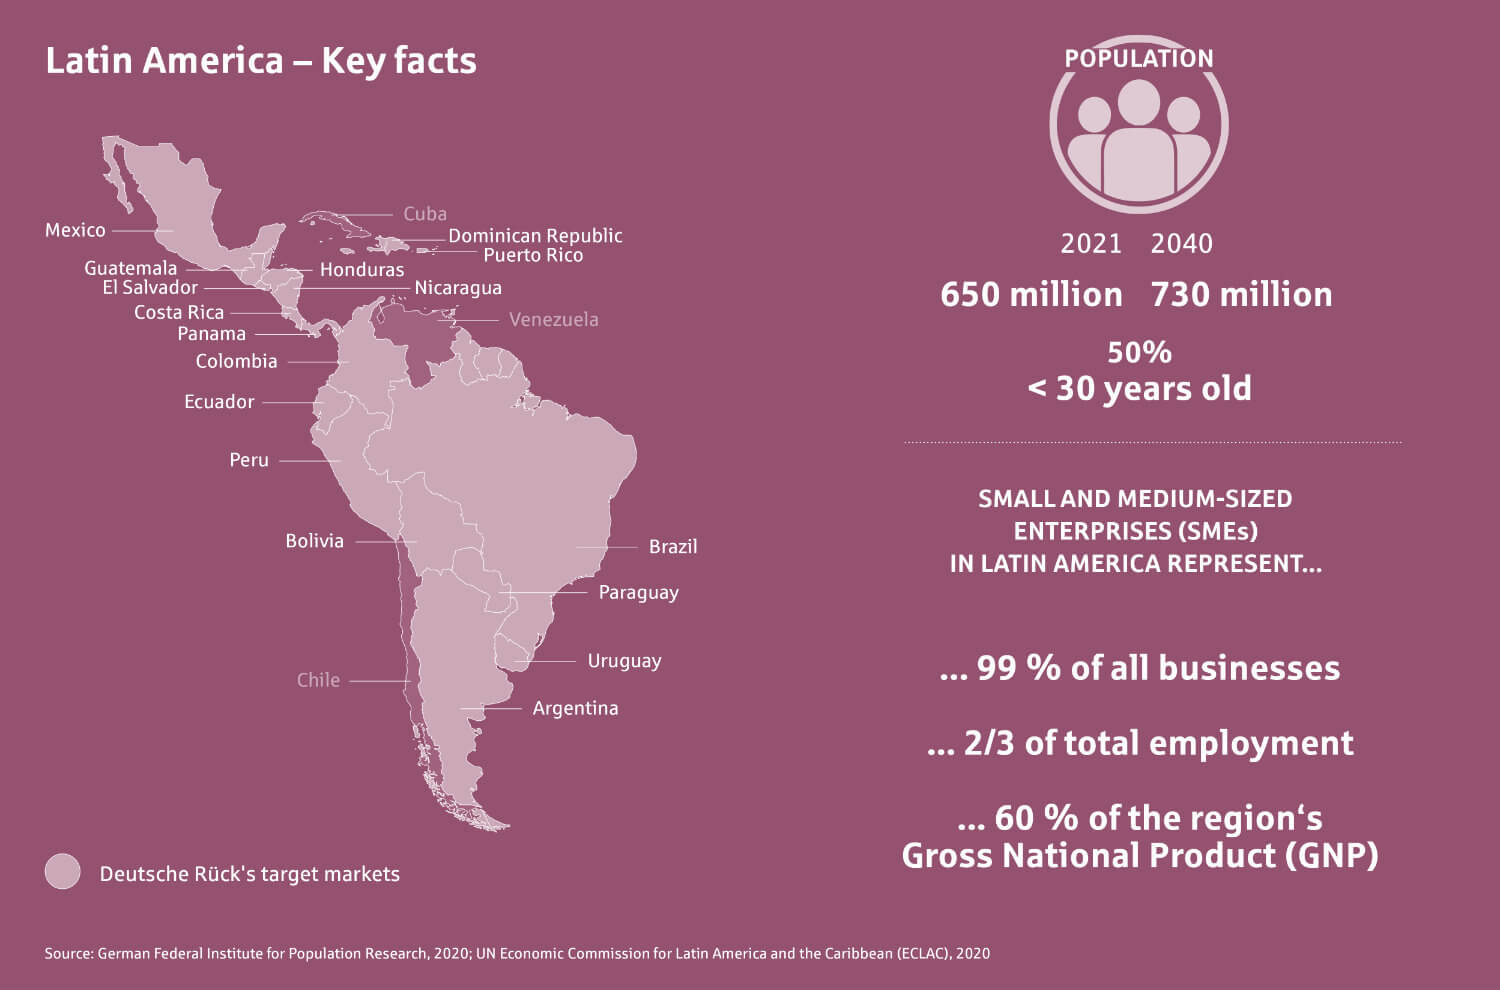 Latin America – Key facts – population, 2021: 650 million, 2040: 730 million, 50% < 30 years old – Small and medium-sized enterprises (SMEs) in Latin America represent 99% of all businesses, 2/3 of total employment, 60% of the region‘s Gross National Product (GNP) – Source: German Federal Institute for Population Research, 2020; UN Economic Commission for Latin America and the Caribbean (ECLAC), 2020 | Latin America – marketreport